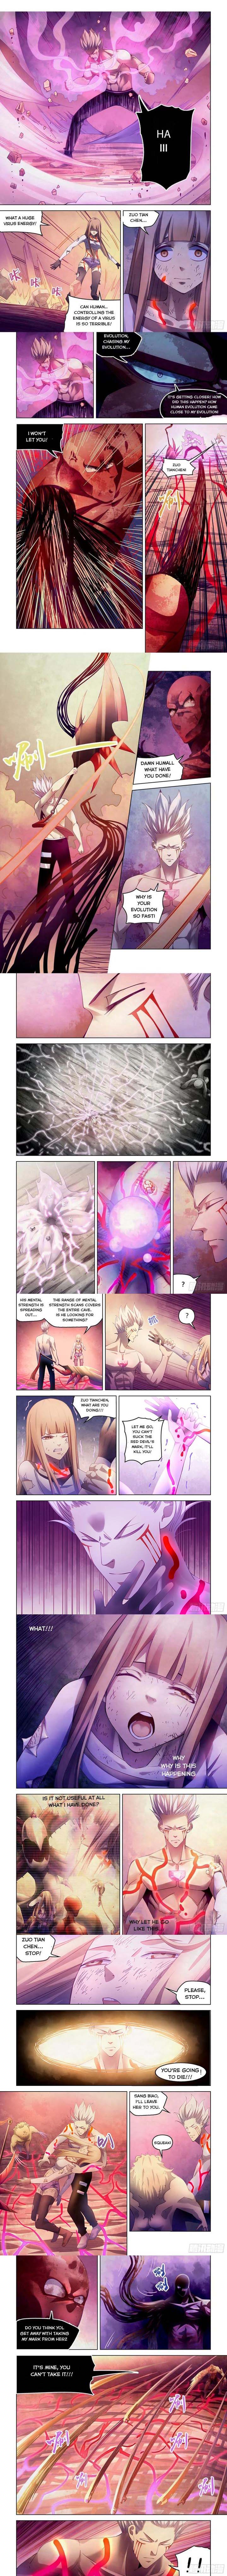 The Last Human Chapter 303 Page 1